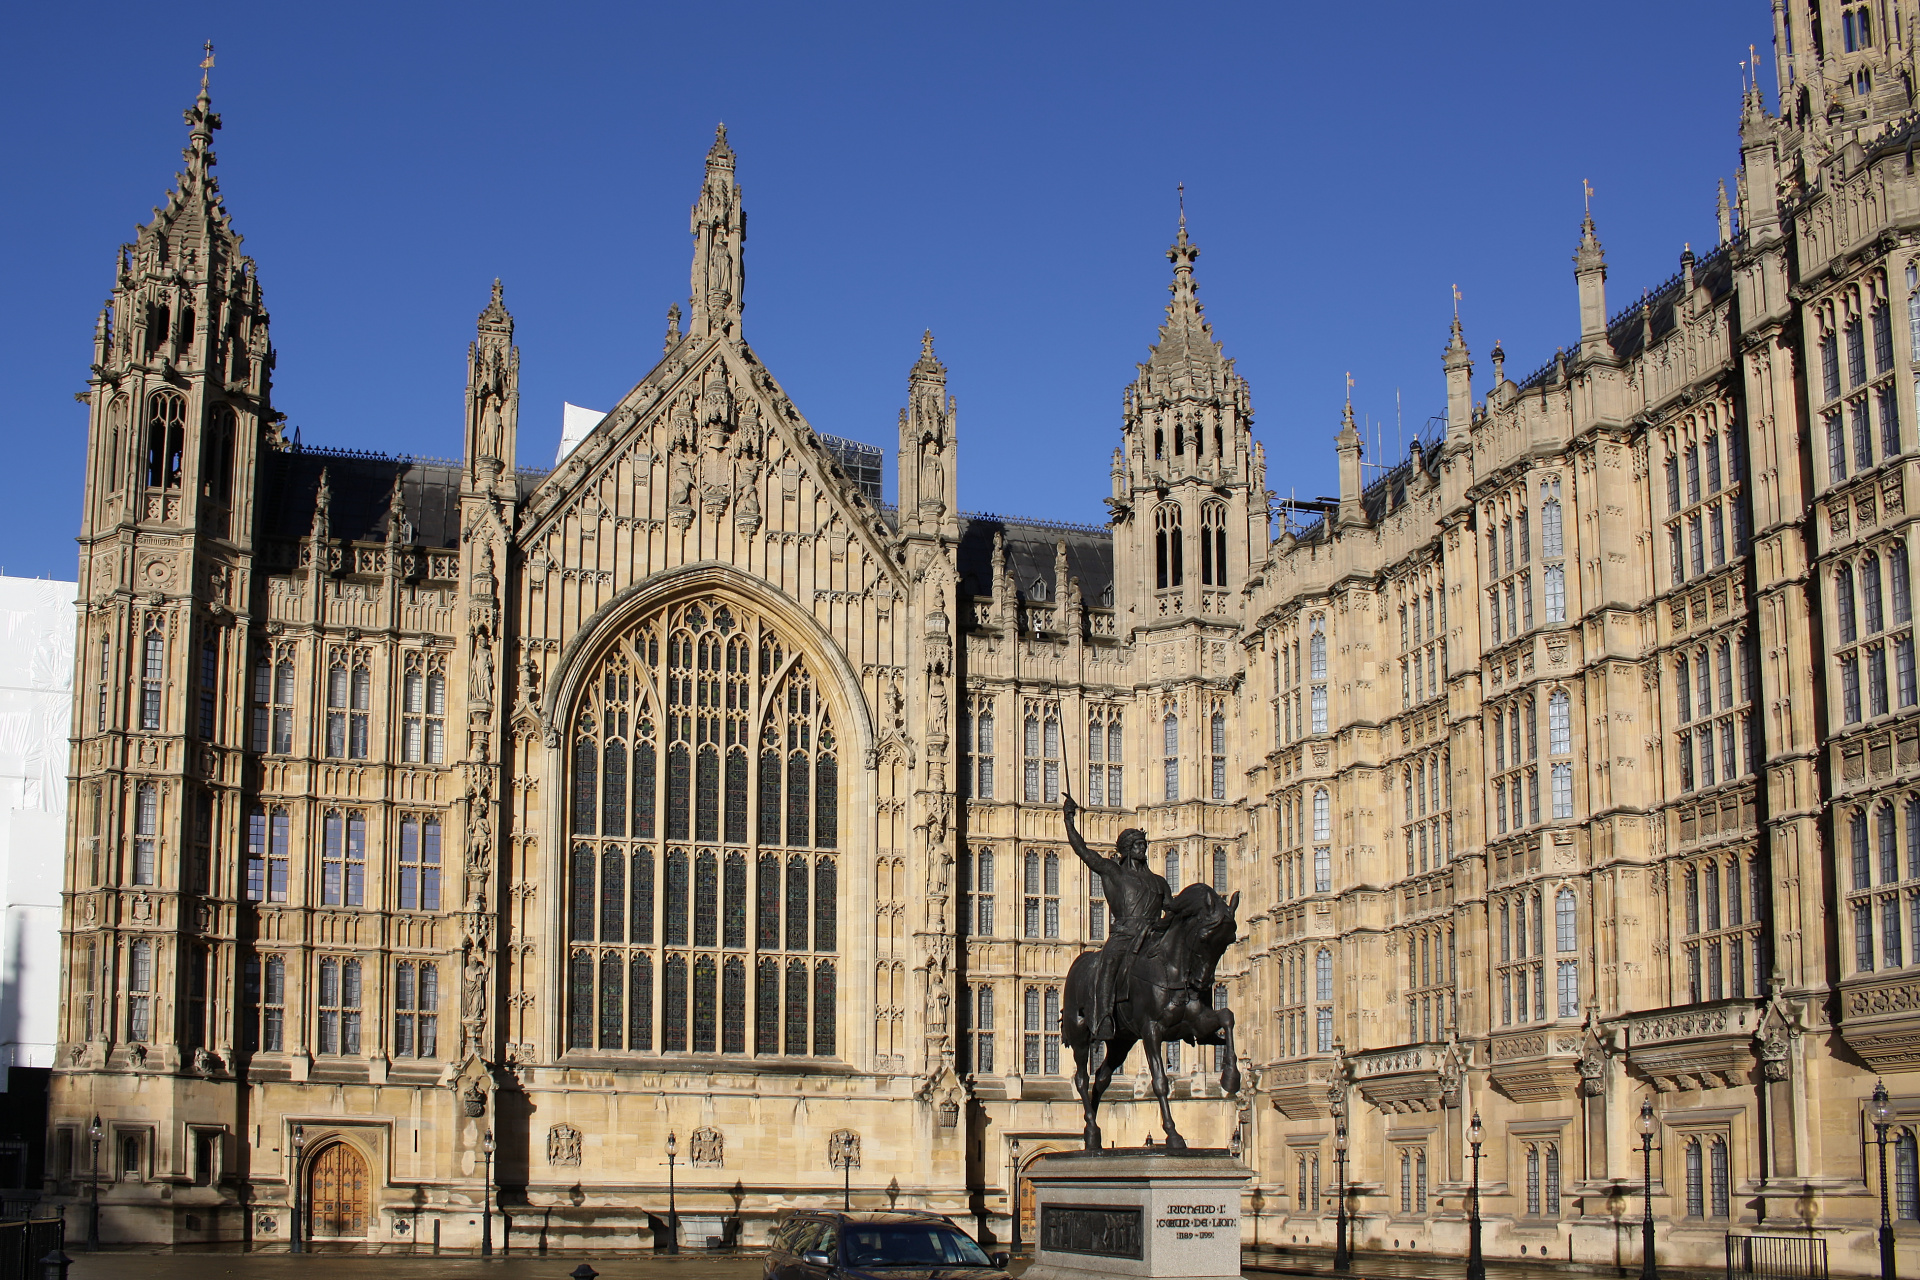 The Palace of Westminster - Old Palace Yard (Travels » London » London at Day)